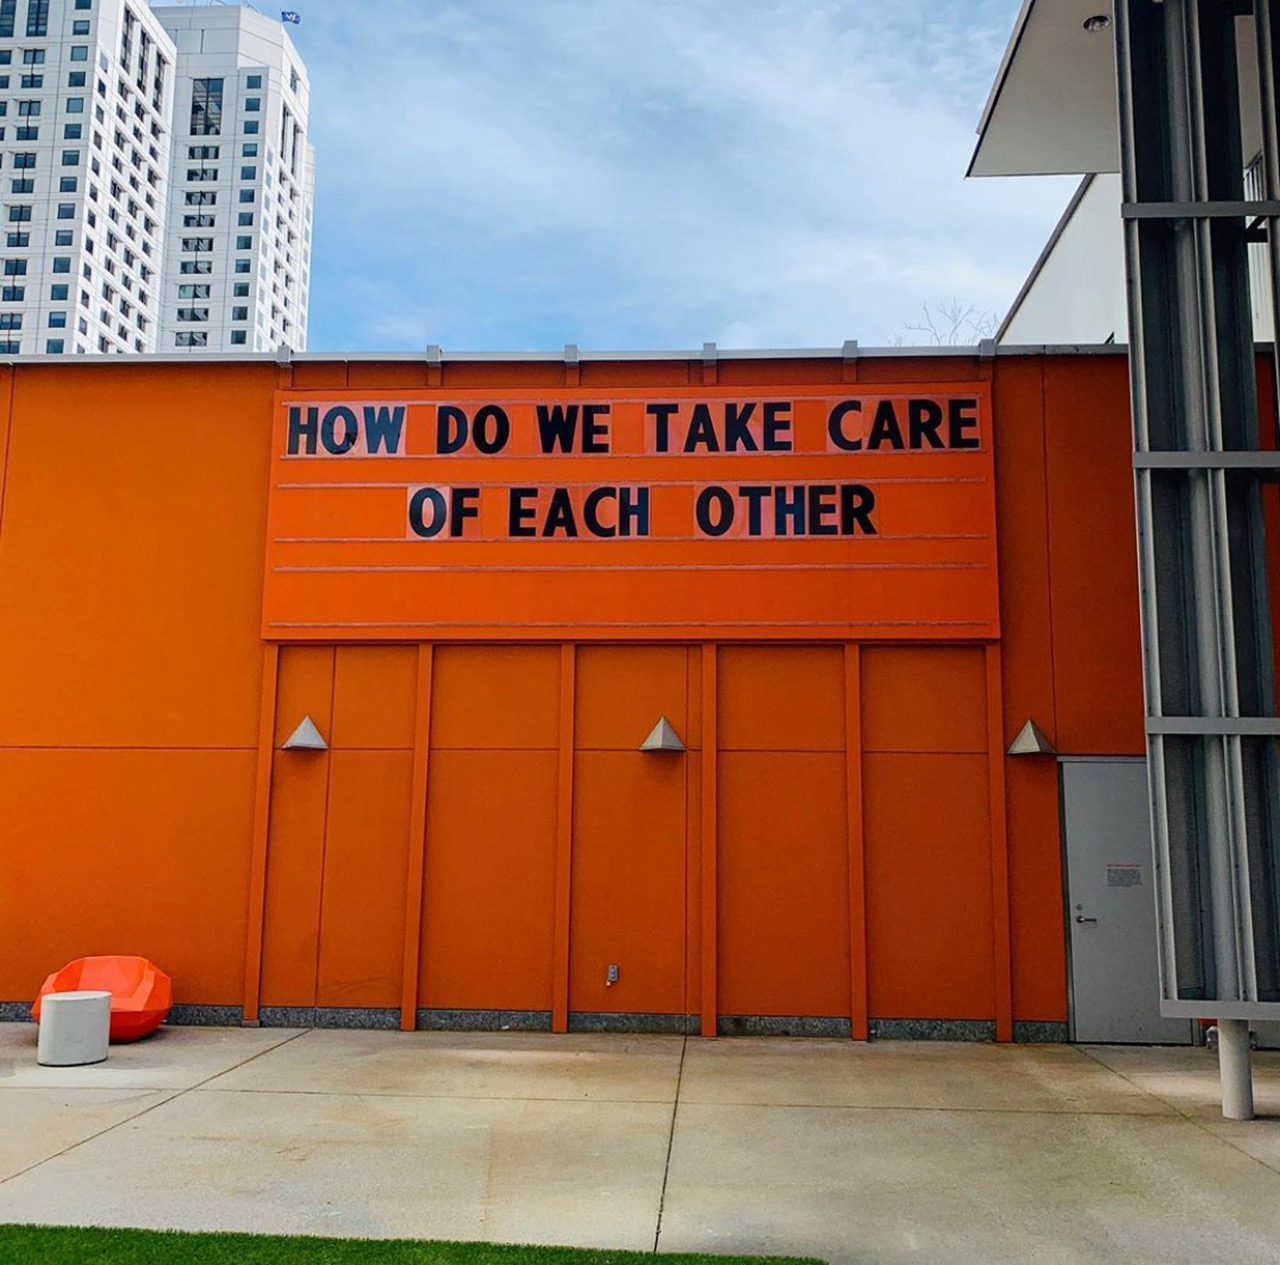 Photo of text "How do we take care of each other" posted on the Yerba Buena Center for the Arts in San Francisco